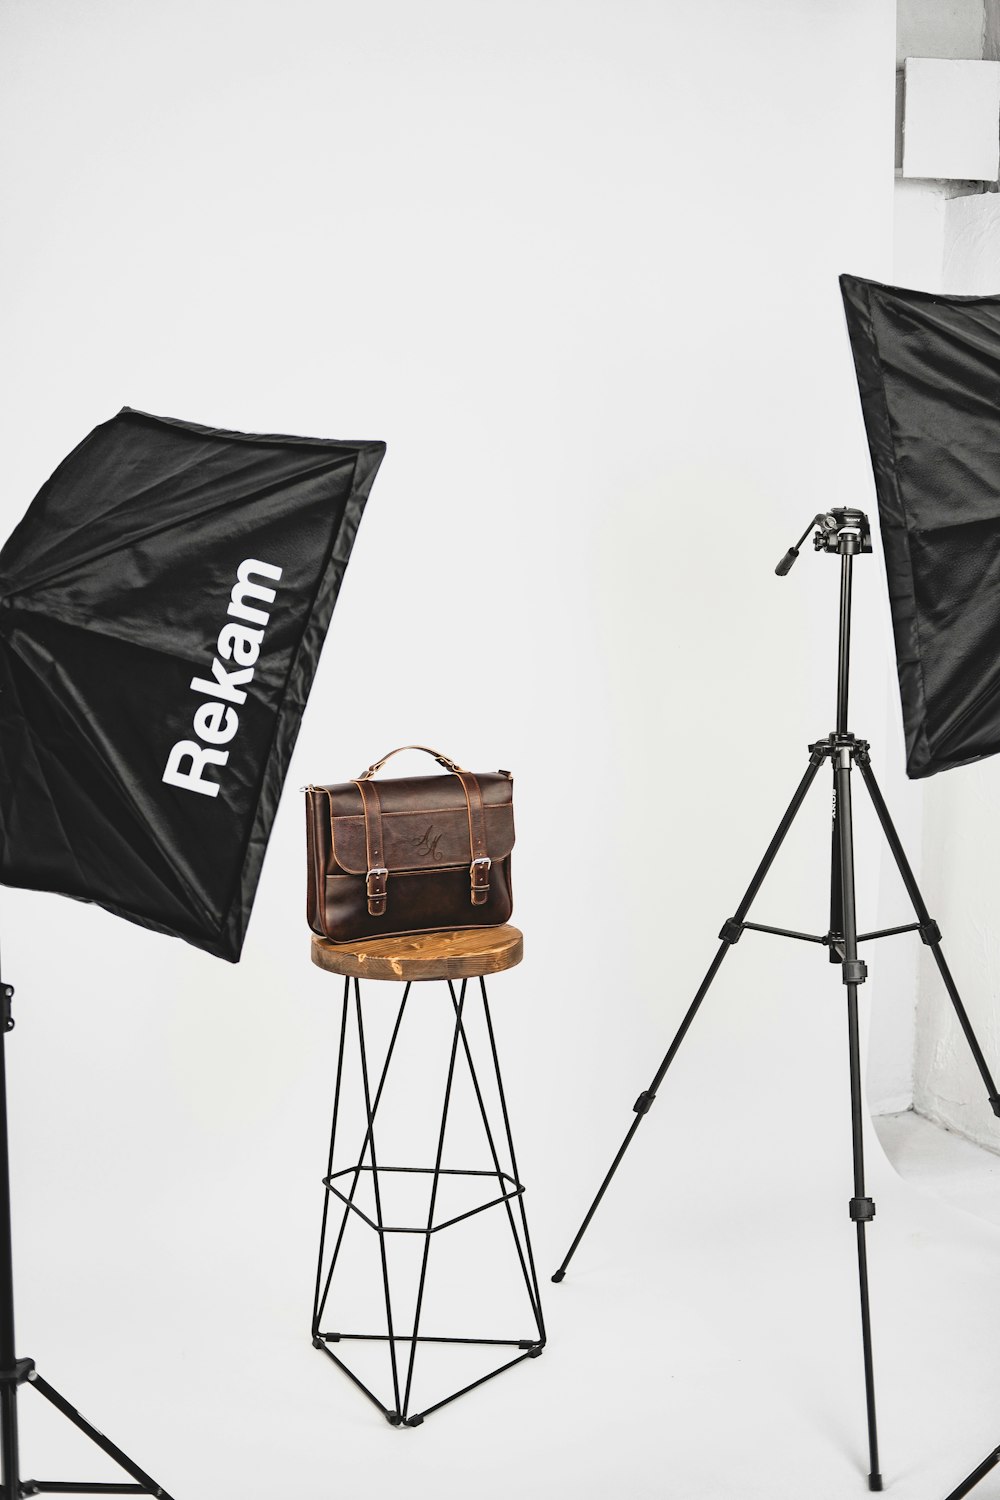 black and brown camera tripod with brown leather shoulder bag on brown wooden table